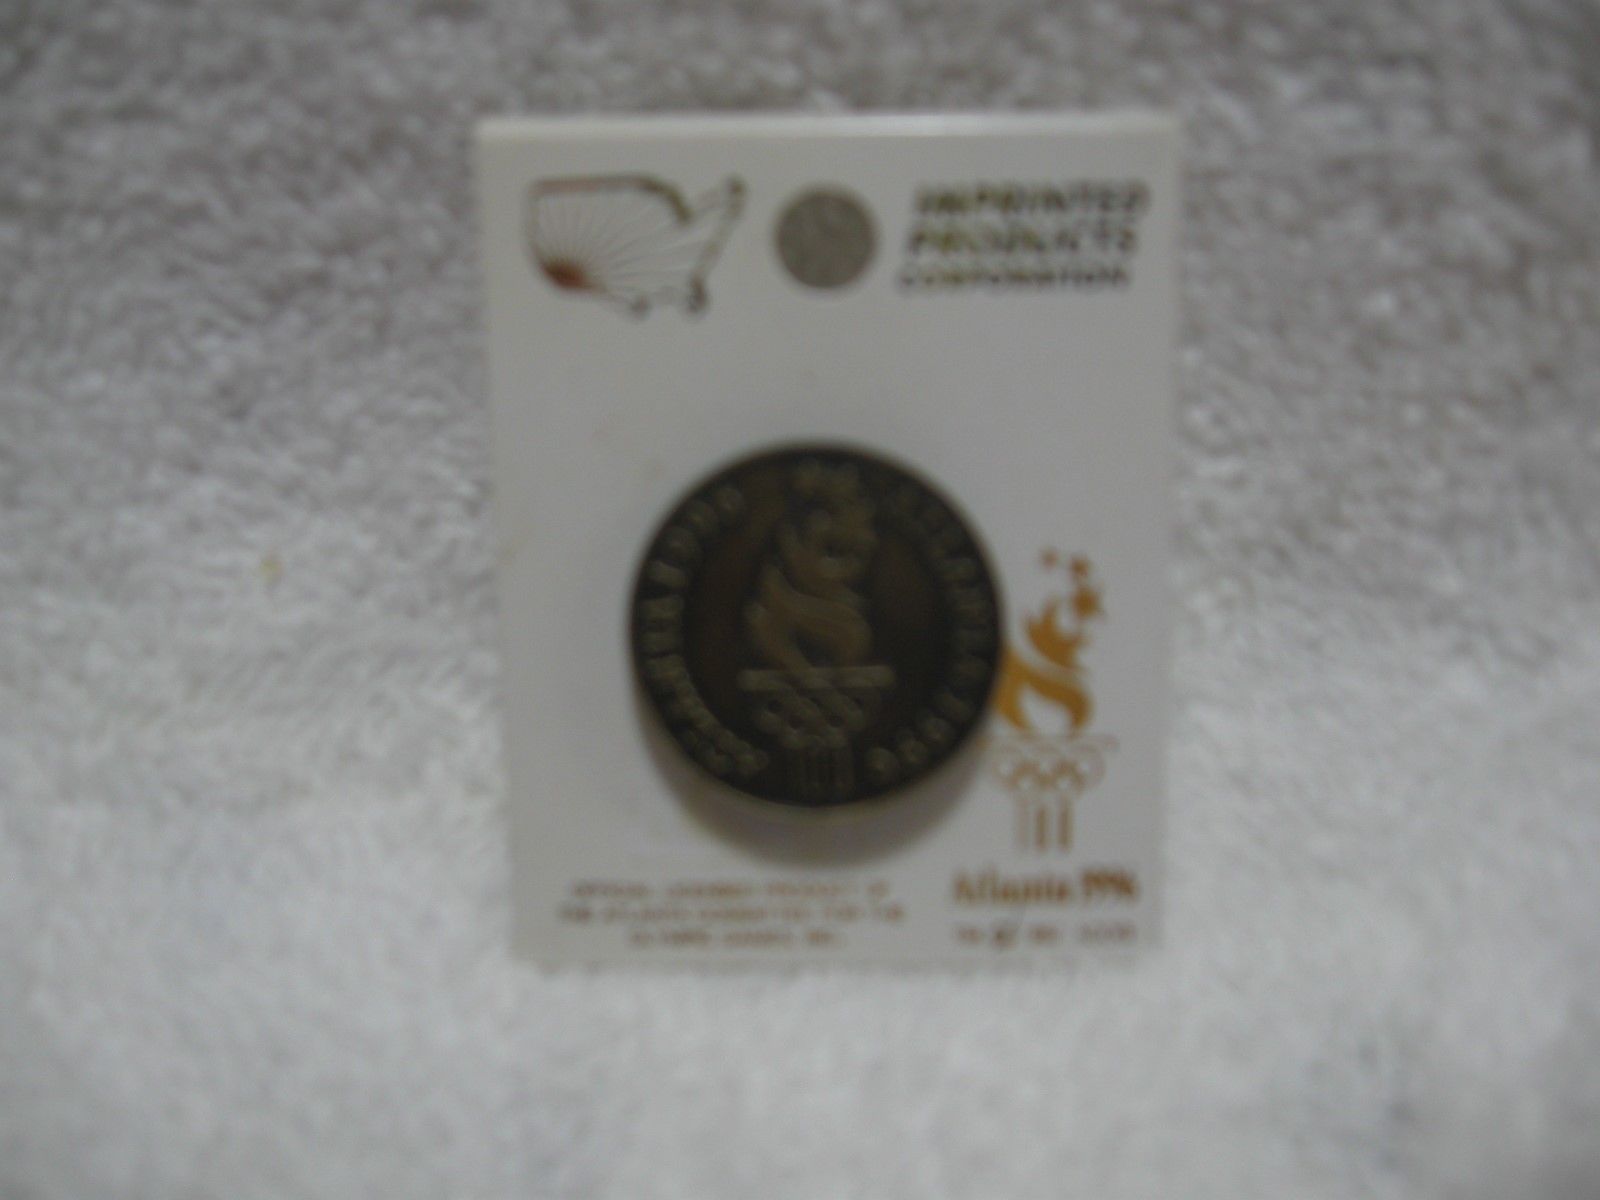 1996 Atlanta Olympics NOS Licensed Torch Lapel Pin-Worldwide Sports Collectible! - $12.95